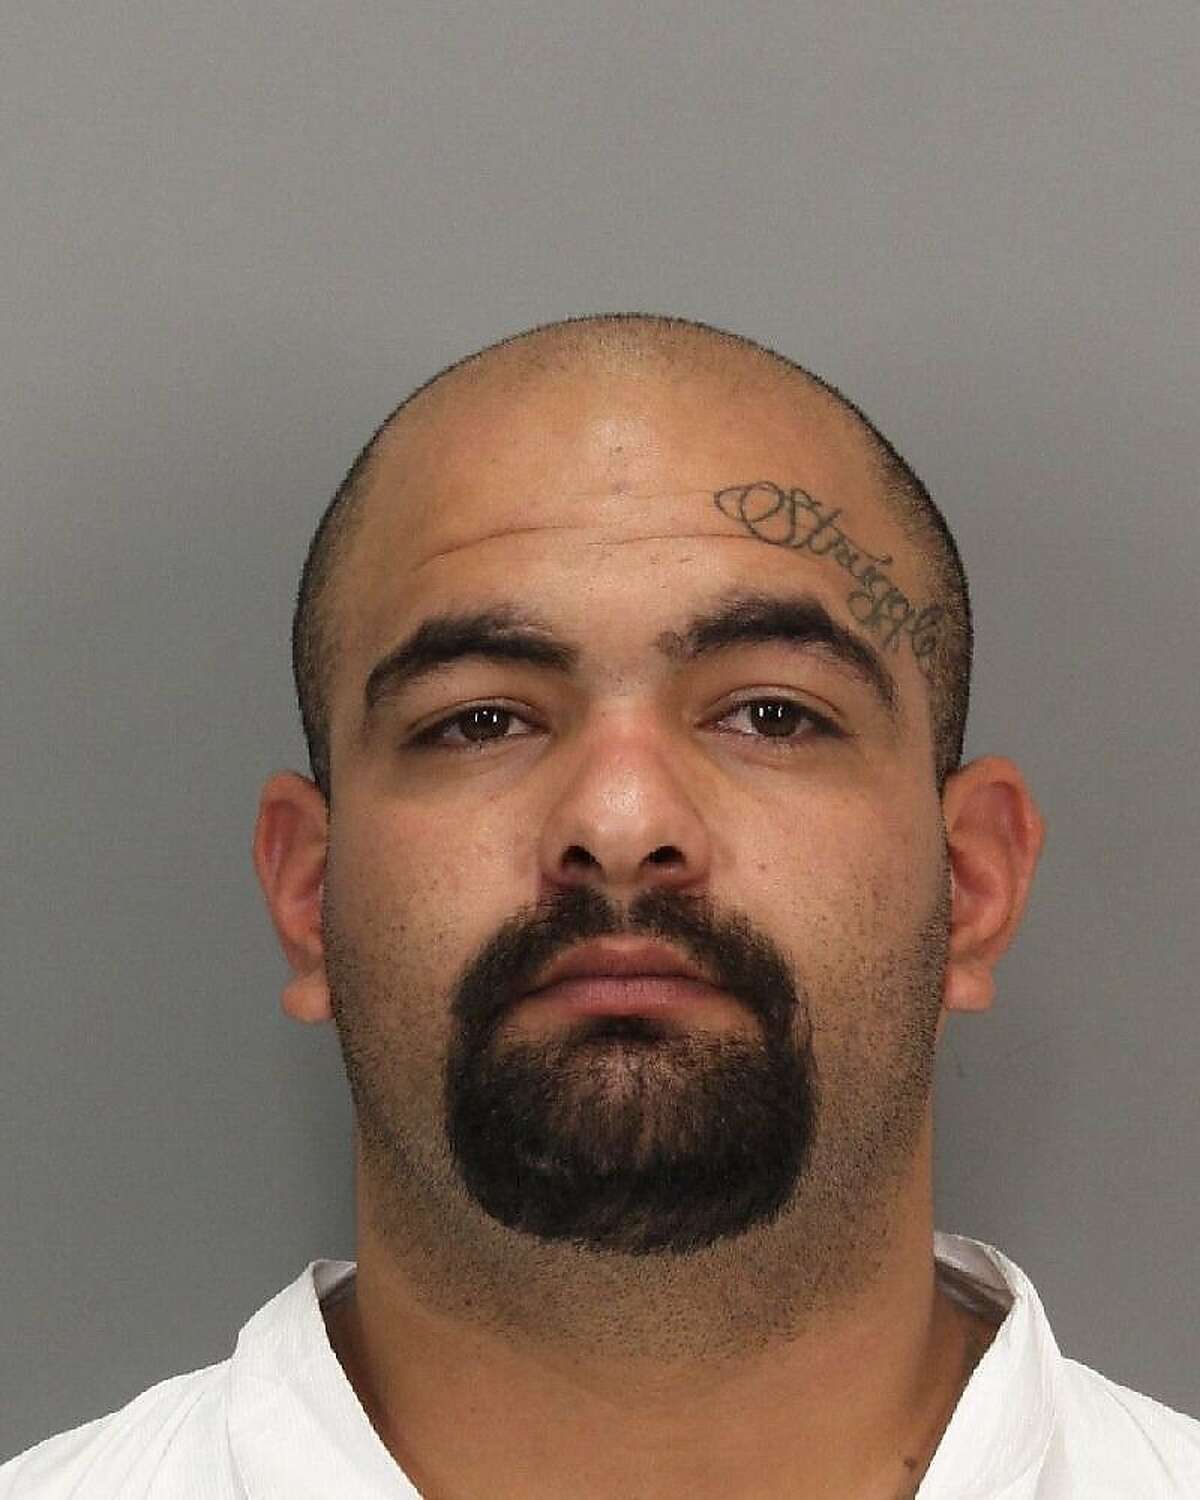 Amador Rebollero was arrested for felony assault after a beating at Levi's Stadium was caught on video.